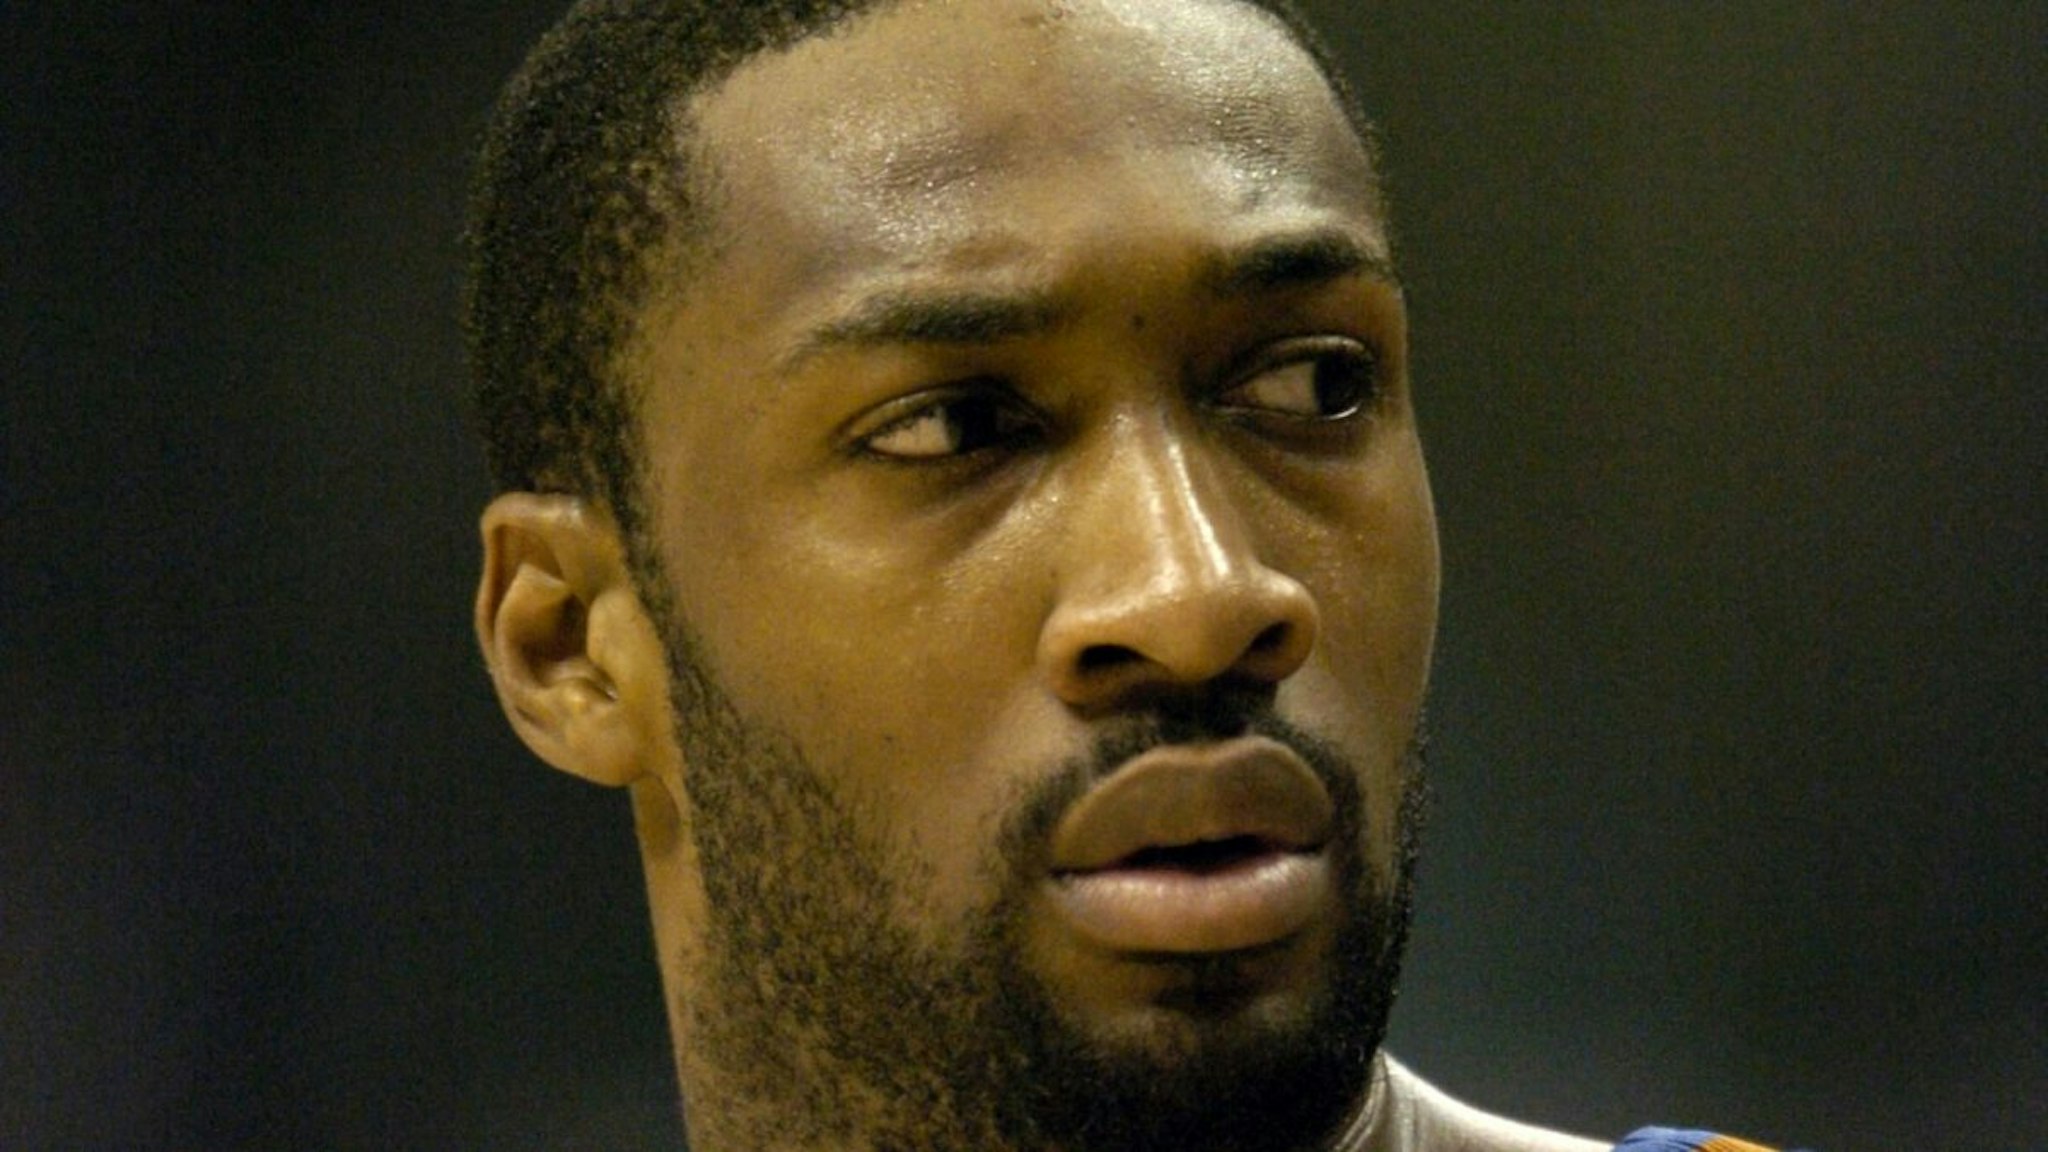 Gilbert Arenas of the Washington Wizards in action during the game between the Los Angeles Clippers and Washington Wizards at the Staples Center in Los Angeles, California, on March 25, 2005.